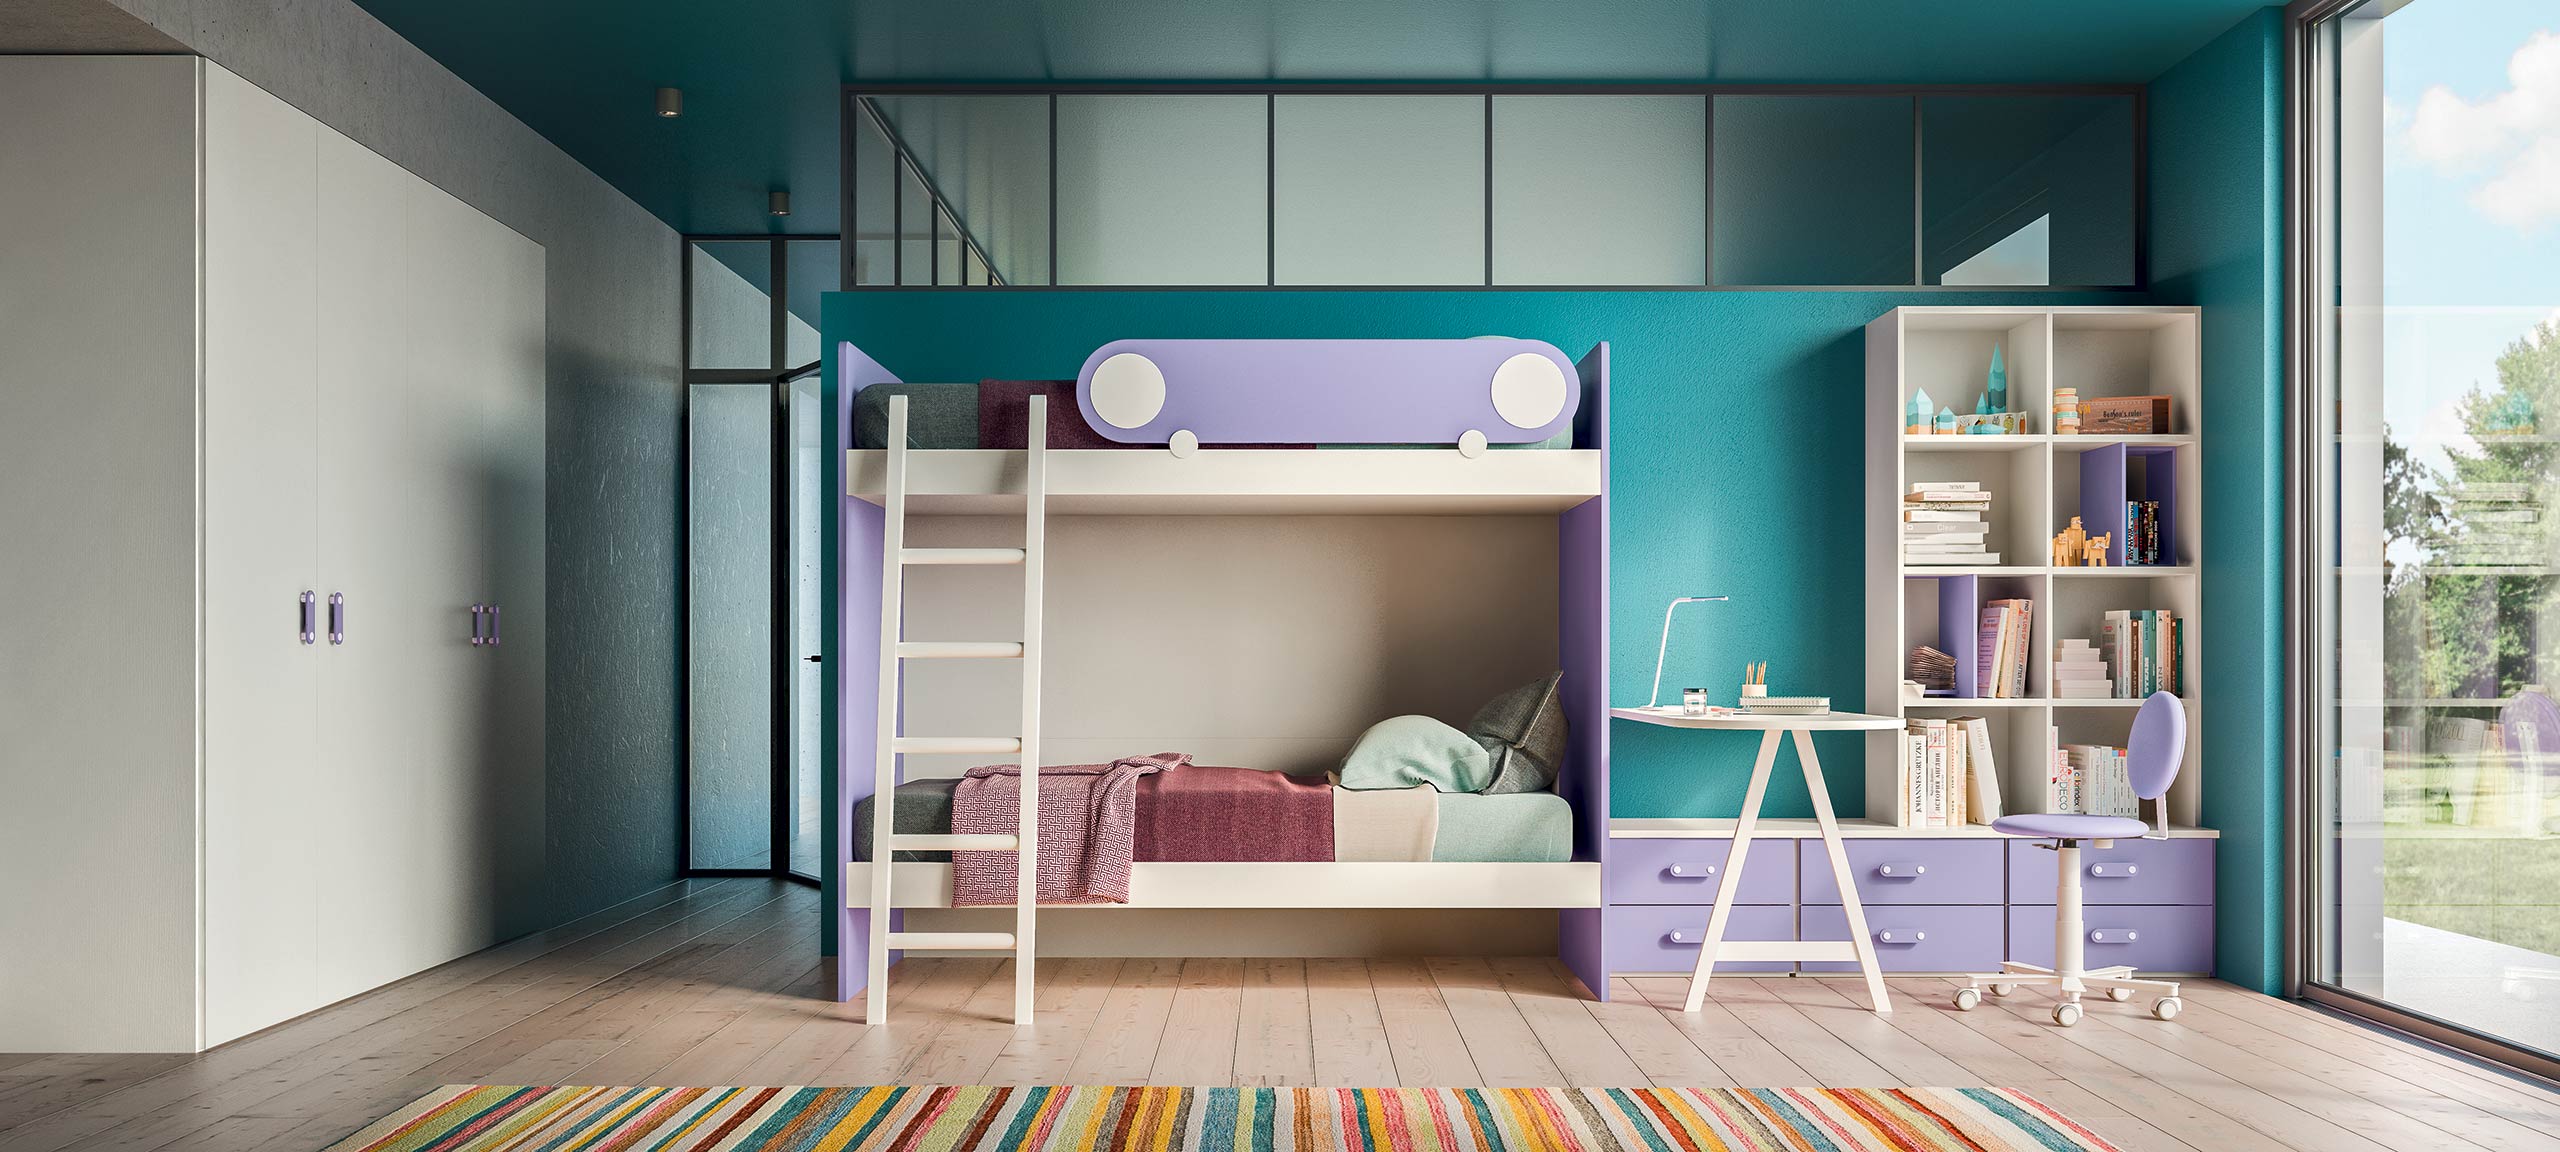 children's bedrooms with bunk beds and convertibles 2